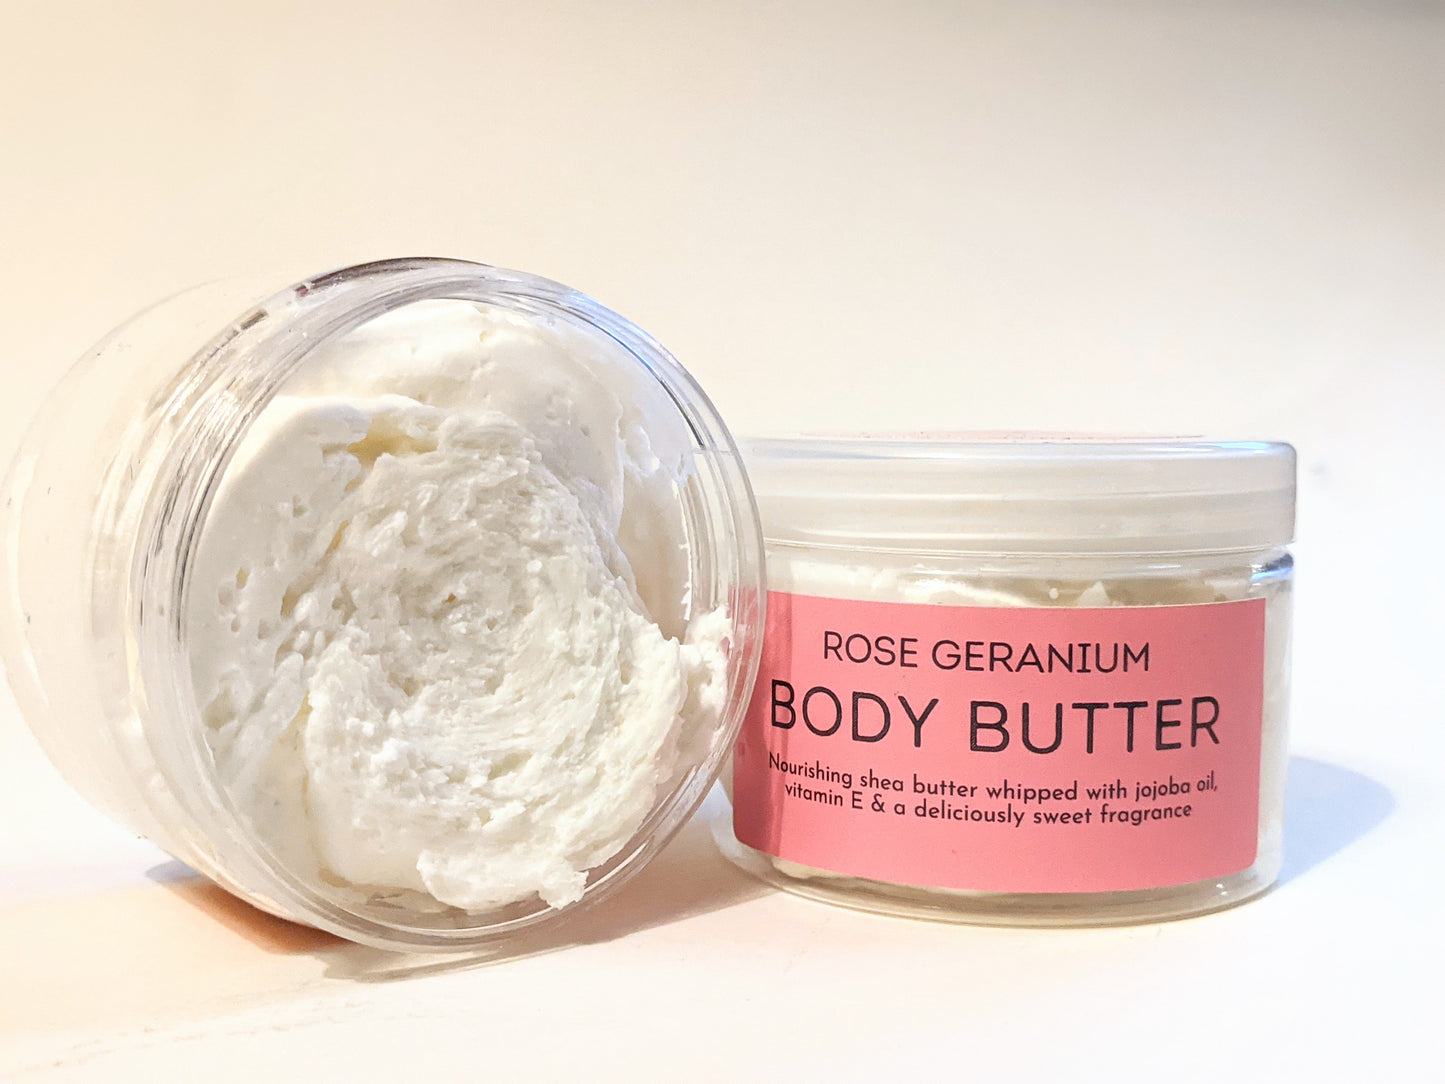 A large tub of the rose geranium body butter. Made with triple whipped shea butter, jojoba oil and coconut oil, it's light and fluffy.